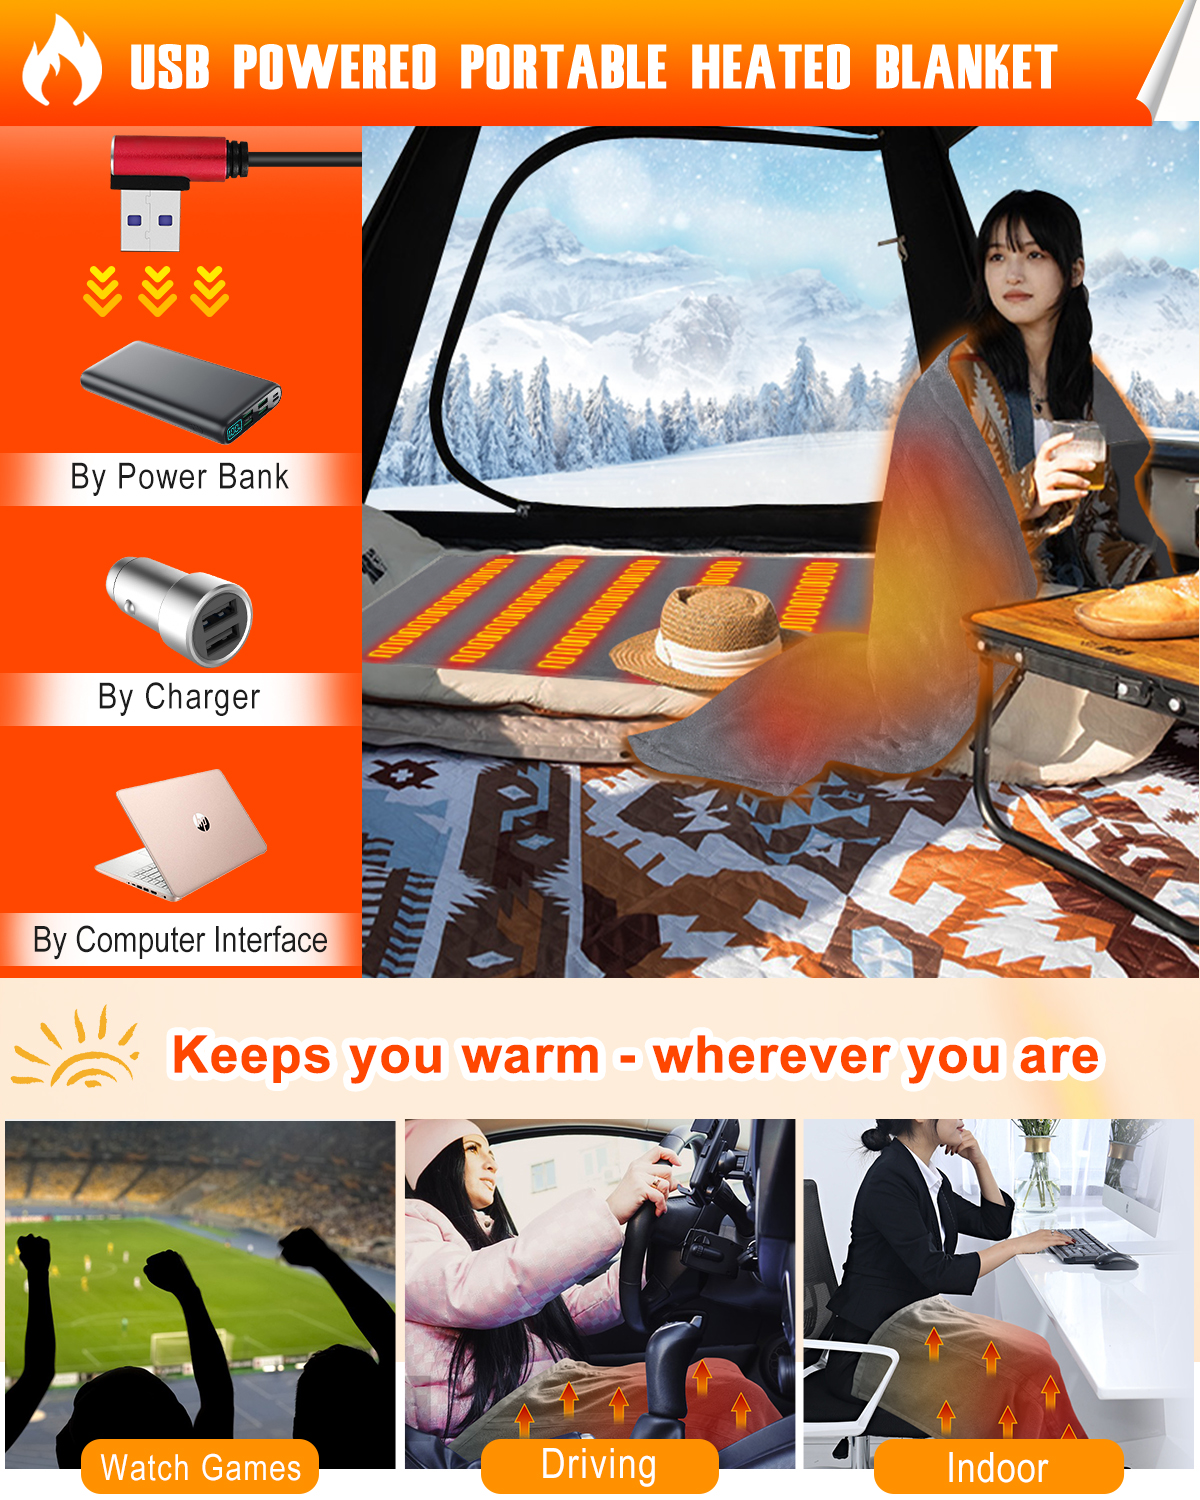 MBVOICO Heated Blanket Battery Operated Portable - USB Electric Throw Blanket Cordless for Camping Outdoor Travel, Size: 31.5 x 55